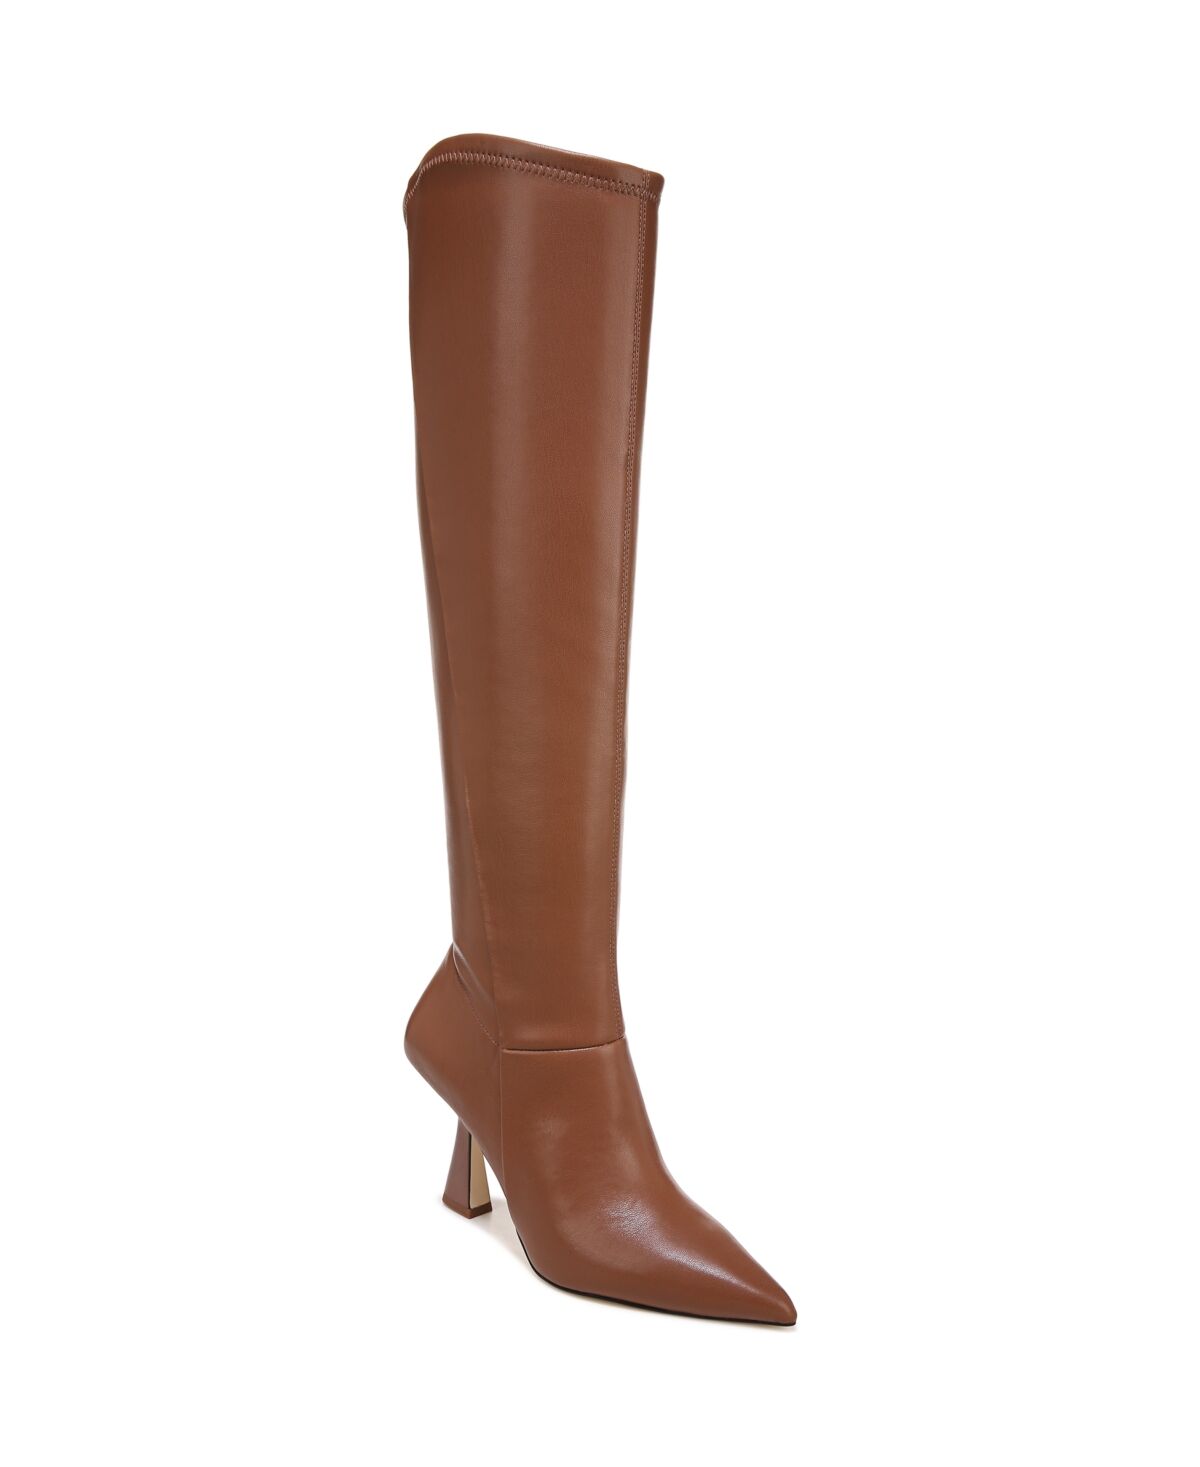 Franco Sarto Alta Knee High Boots - Siena Brown Faux Leather